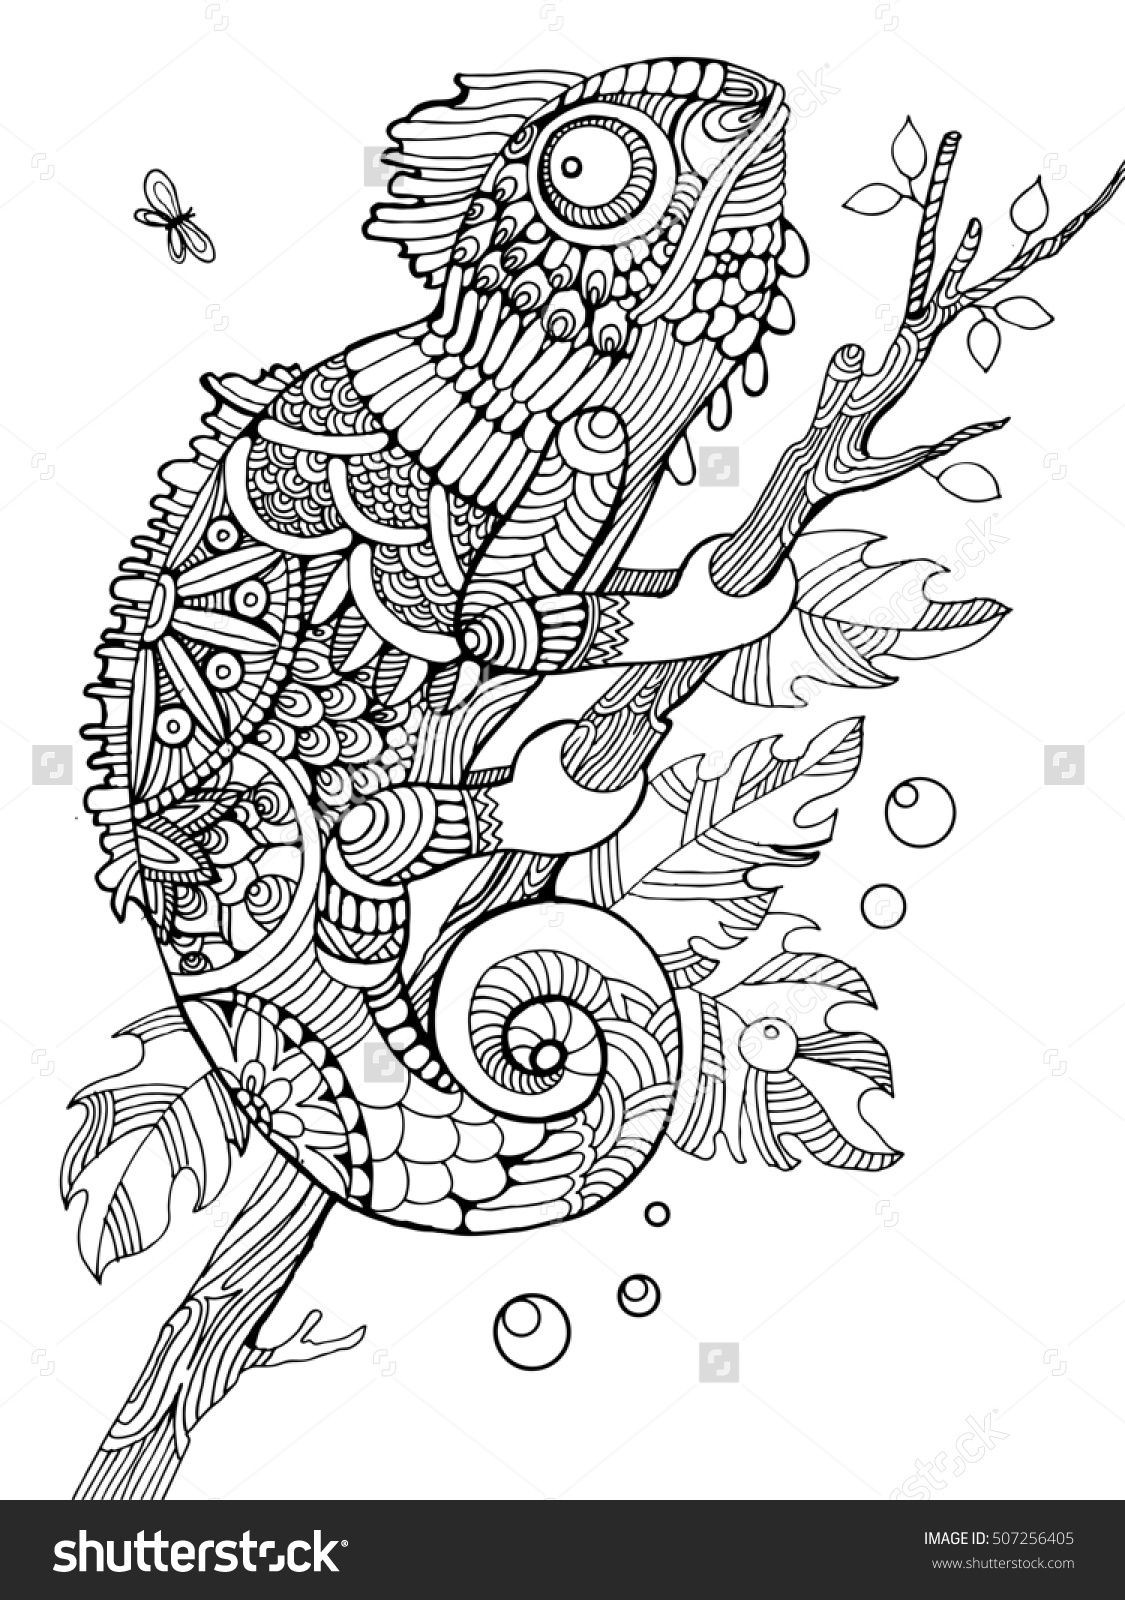 Adult Coloring Book Images
 Chameleon coloring page for adults zentangle style